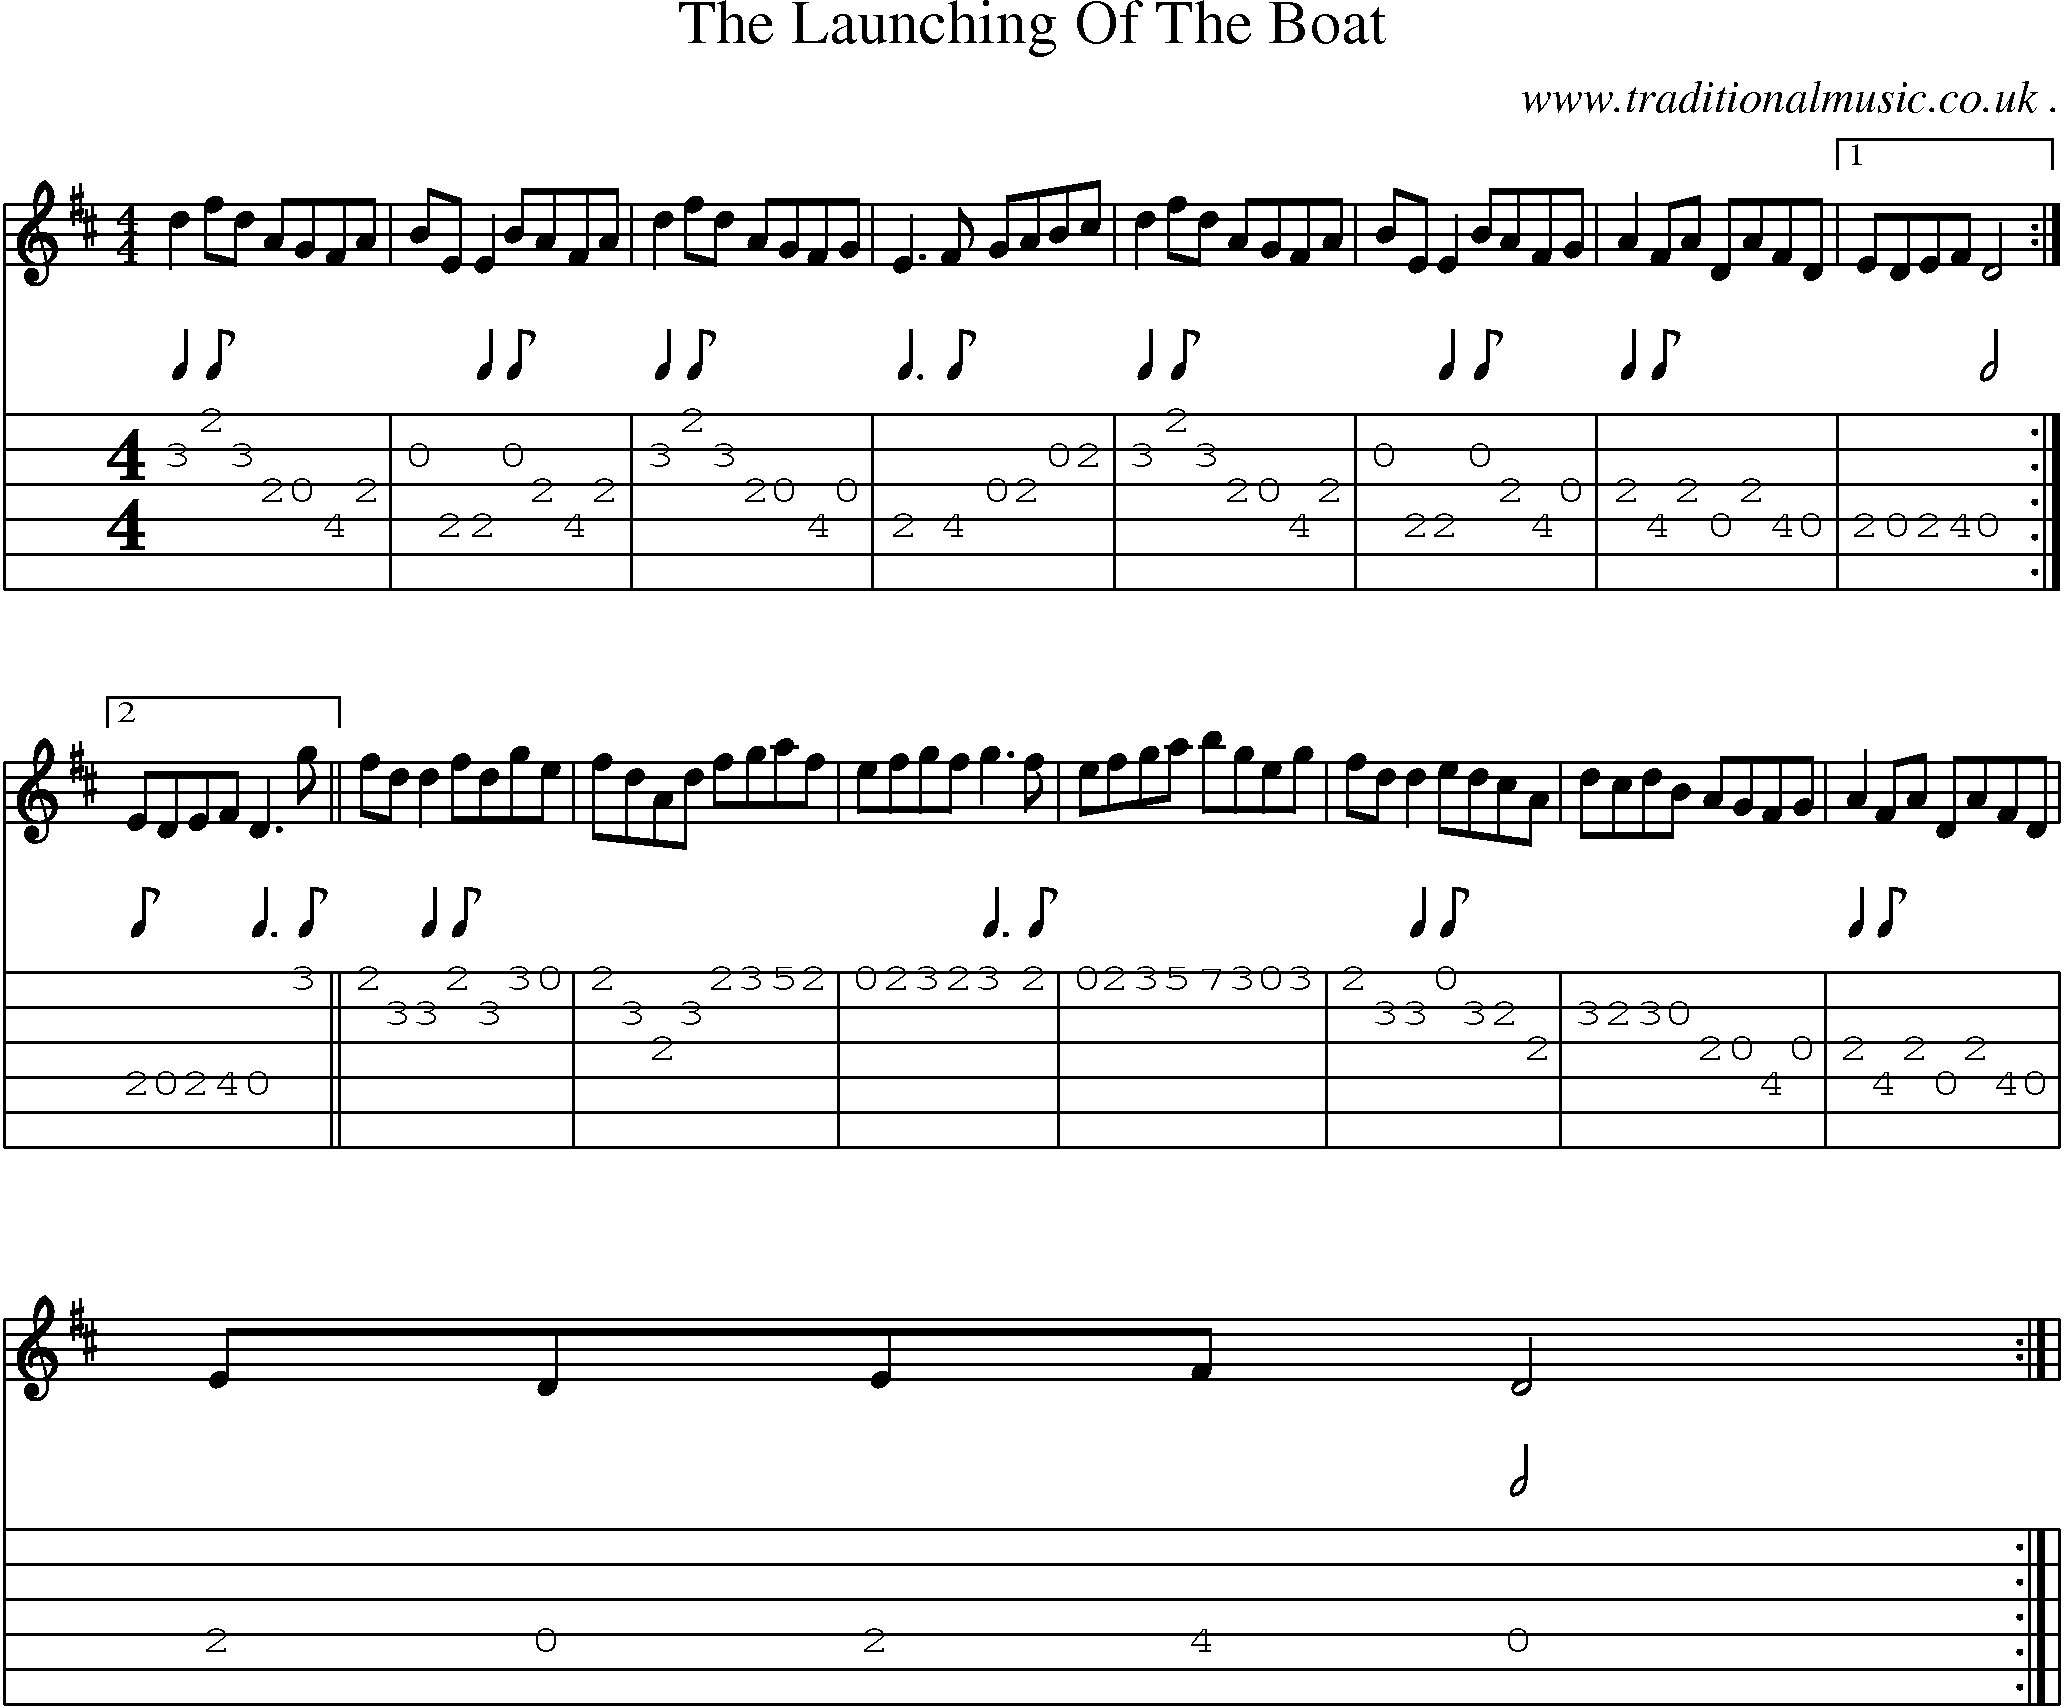 Sheet-Music and Guitar Tabs for The Launching Of The Boat